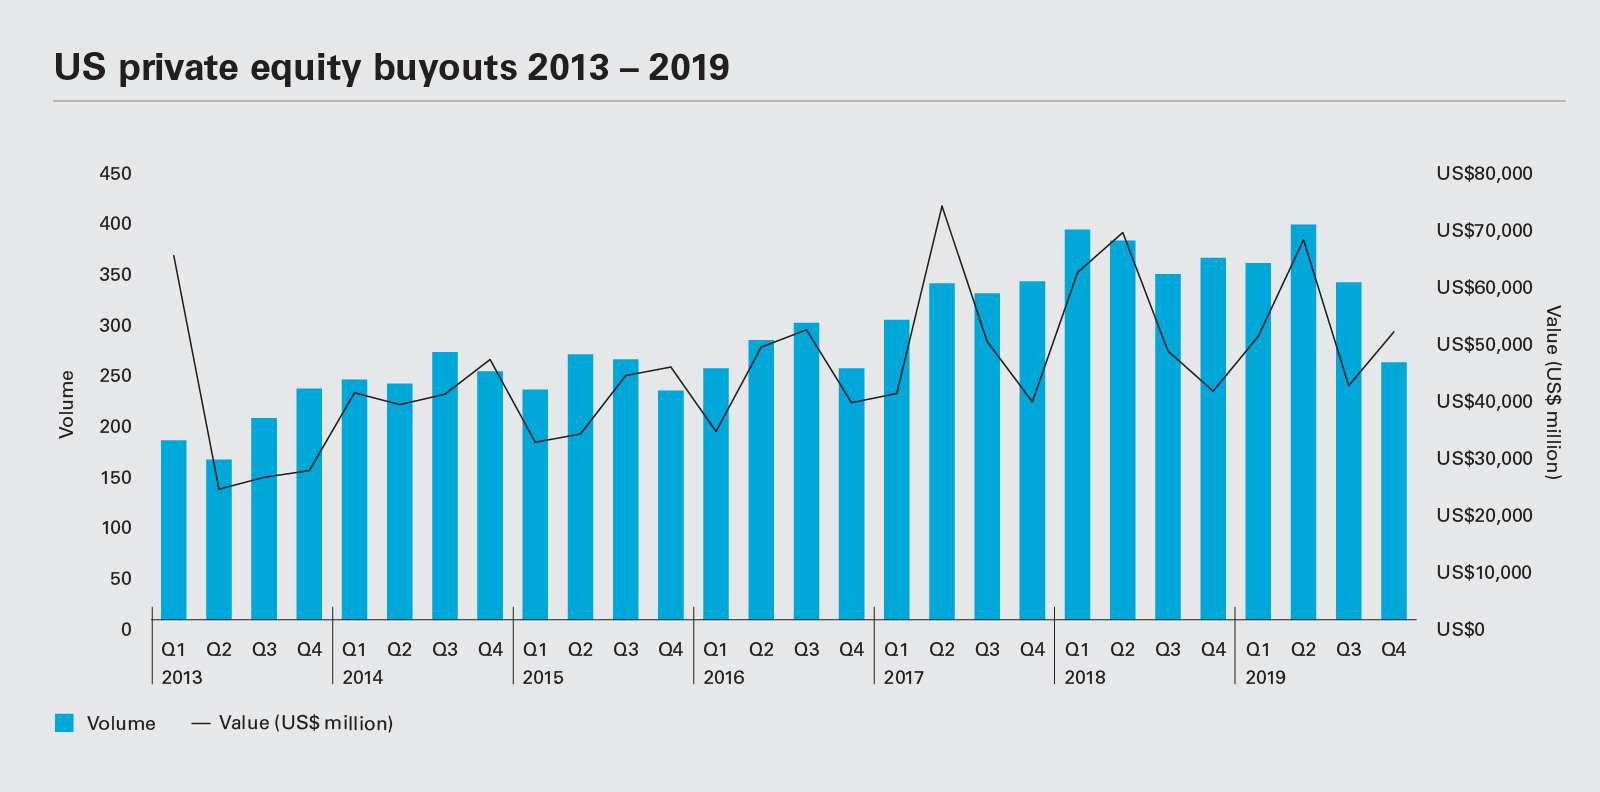 US private equity buyouts 2013 - 2019